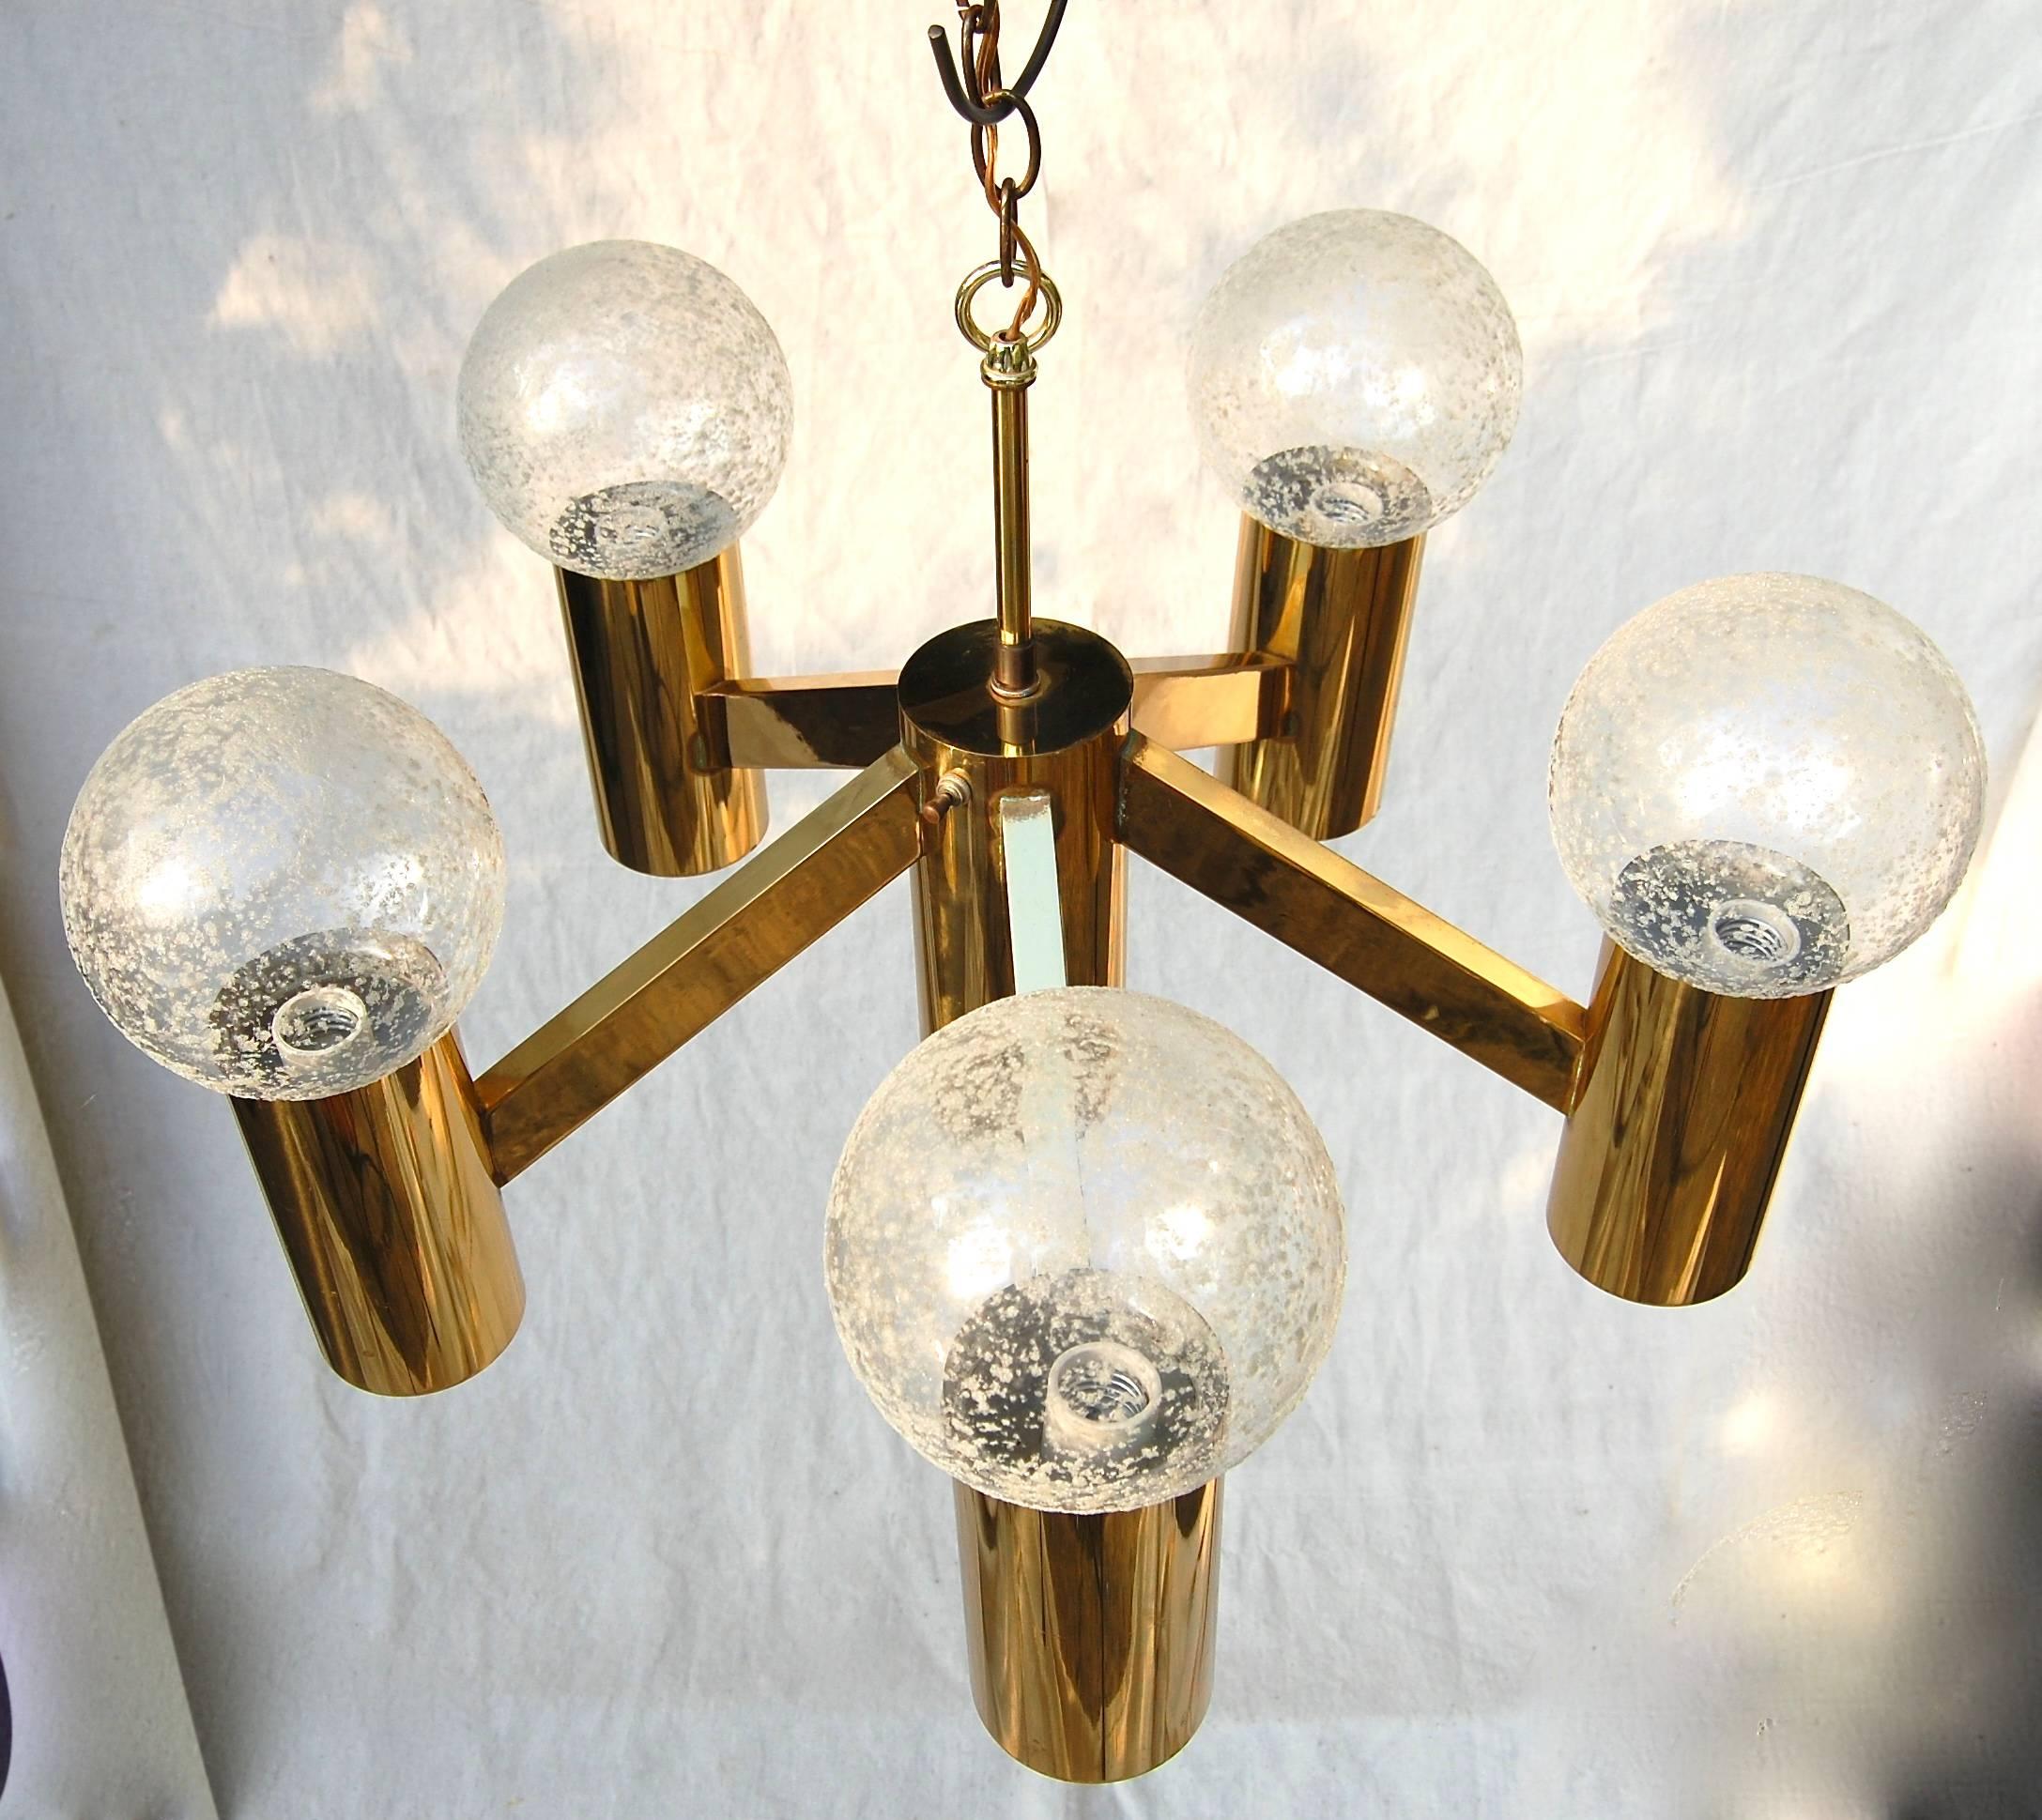 Very nice brass chandelier with glass ball speckled shades. Lights at the bottom of each cone as well to direct light towards table. Switch located on one of the cones to turn downward light on or off. Probably Lightolier or Sonneman Lighting.